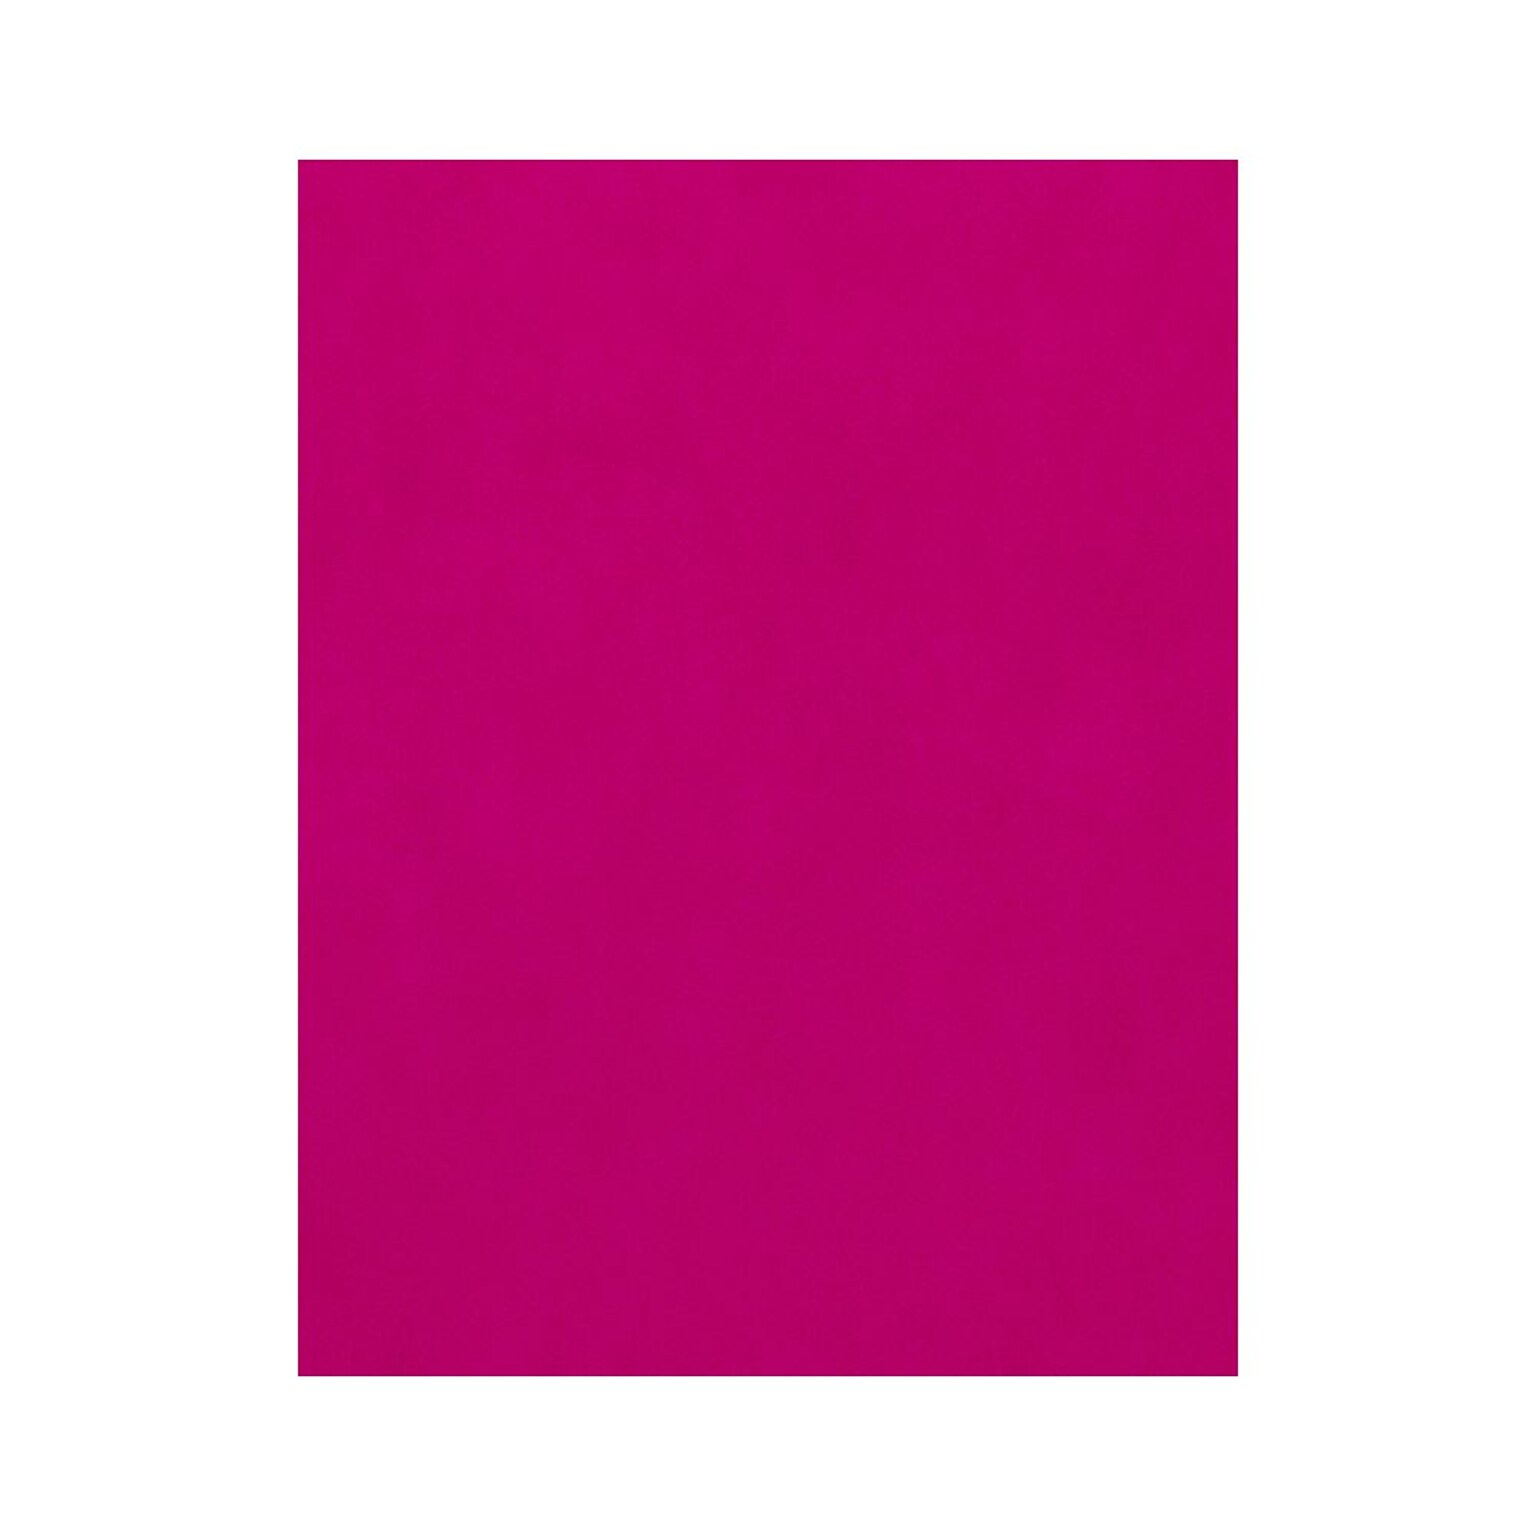 Lux Cardstock 8.5 x 11 inch Magenta Pink 50/Pack